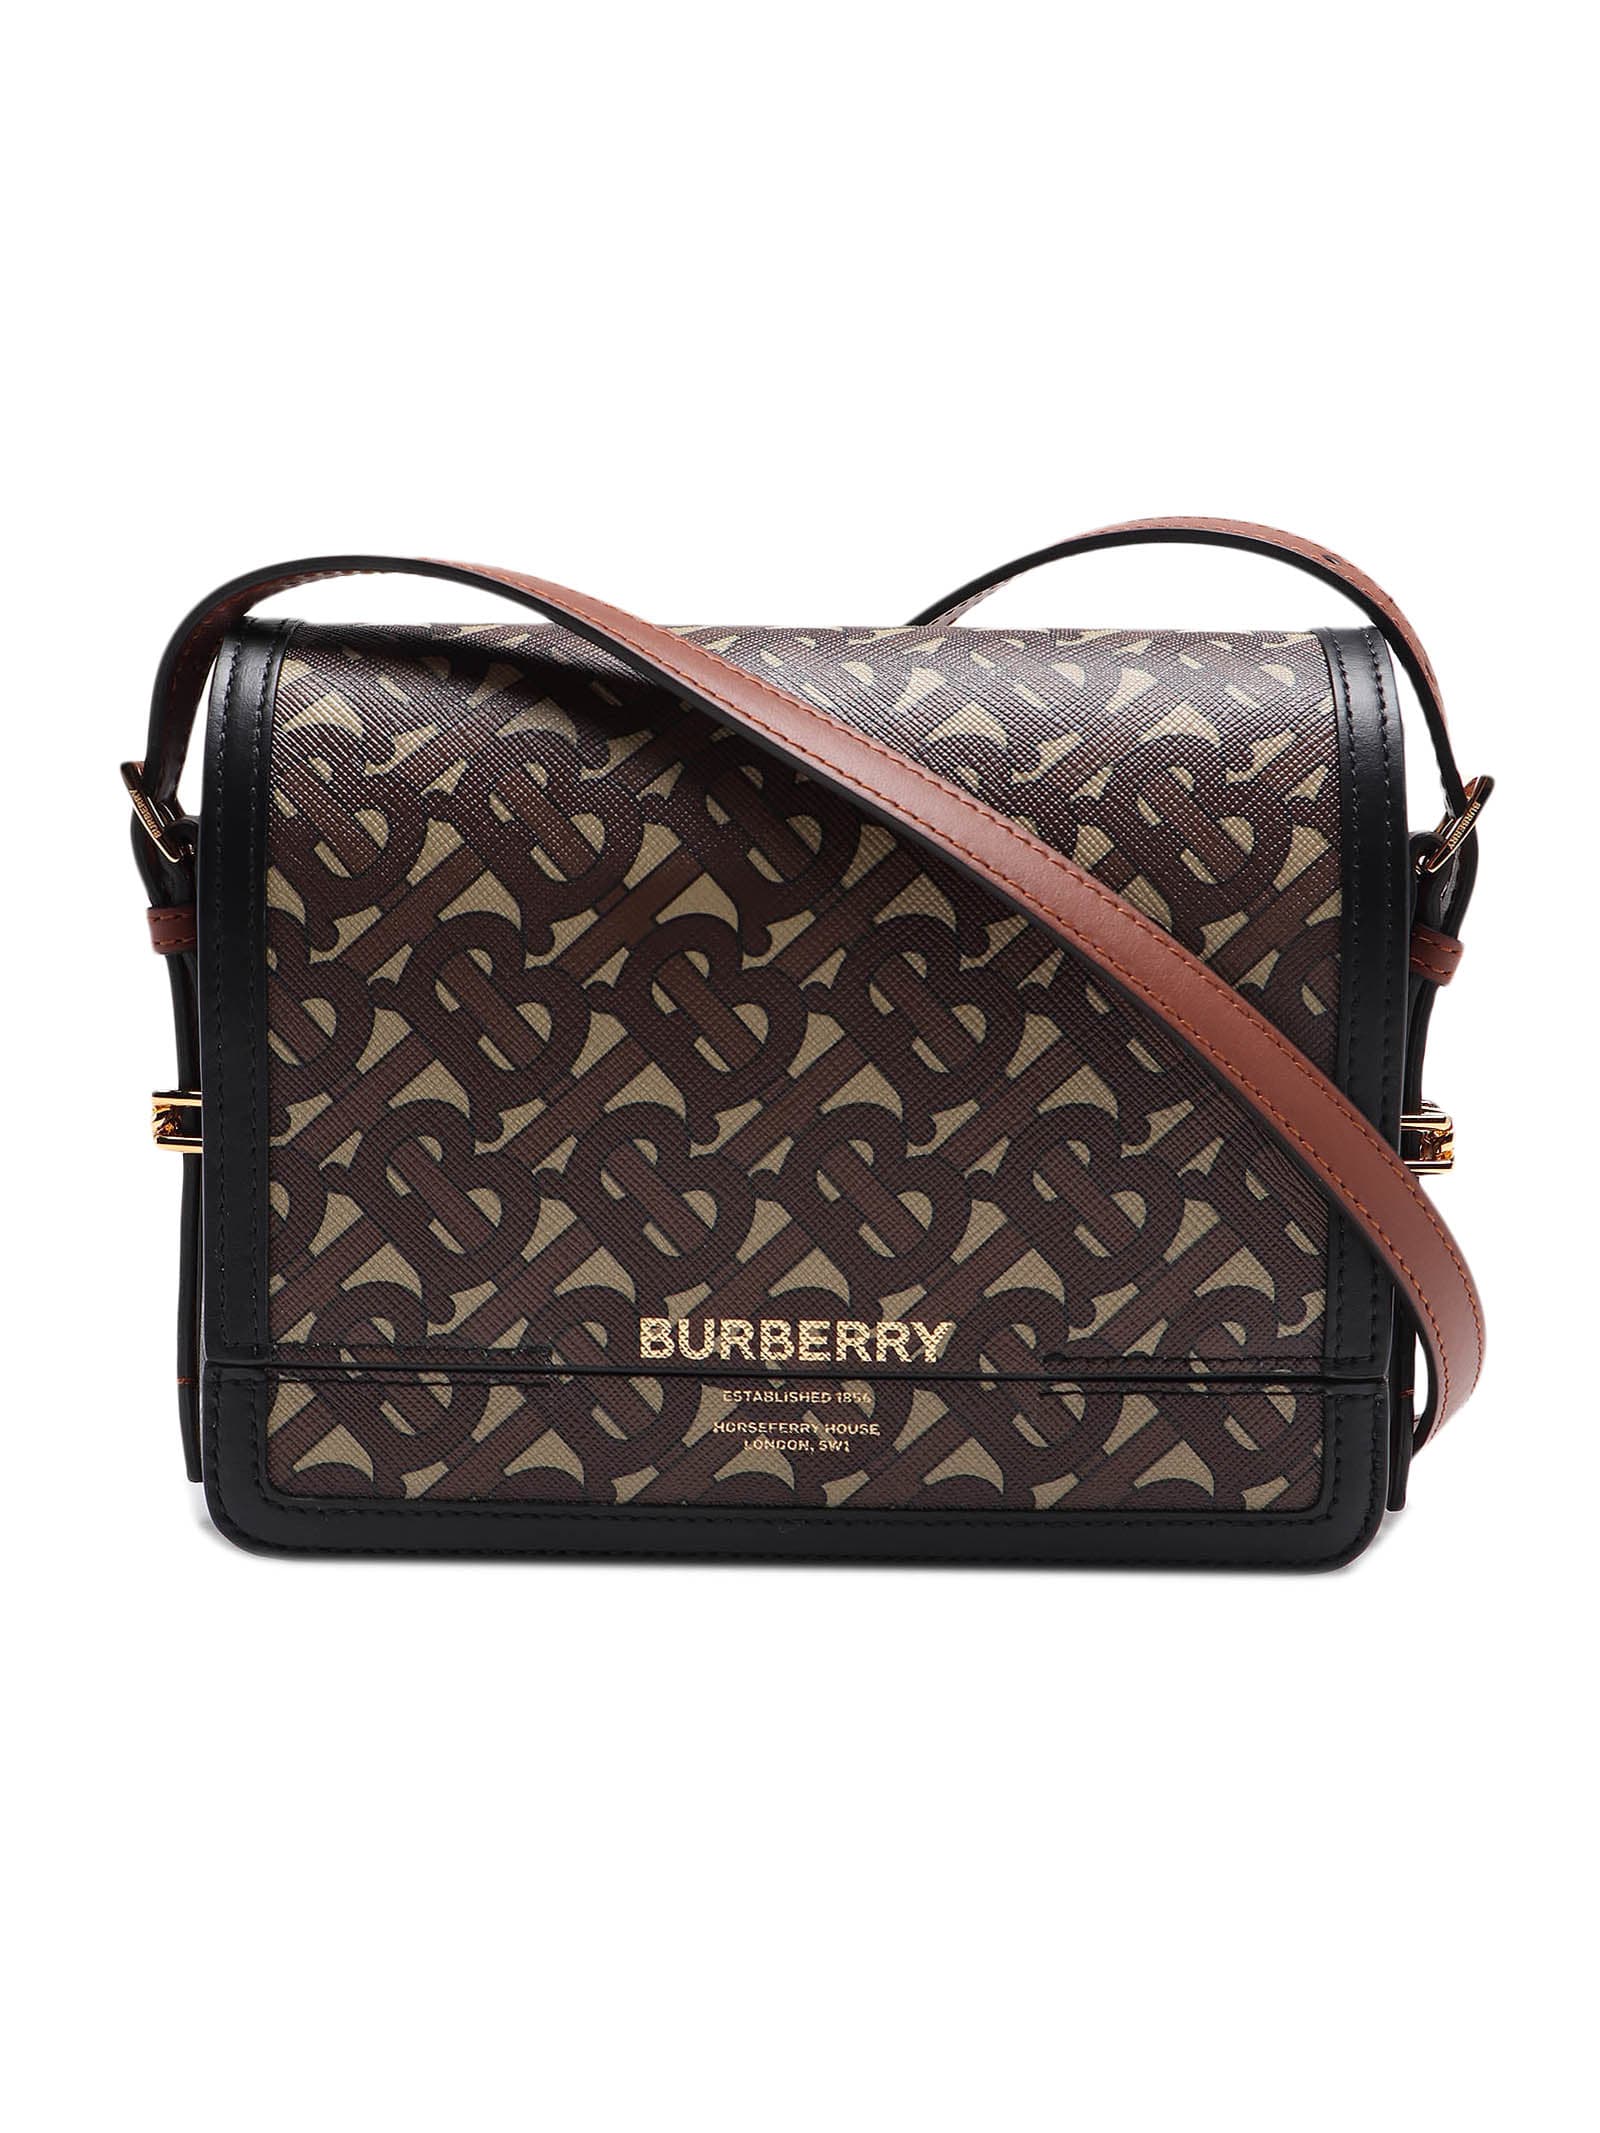 Burberry Sm Grace Bag In Bridle Brown | ModeSens